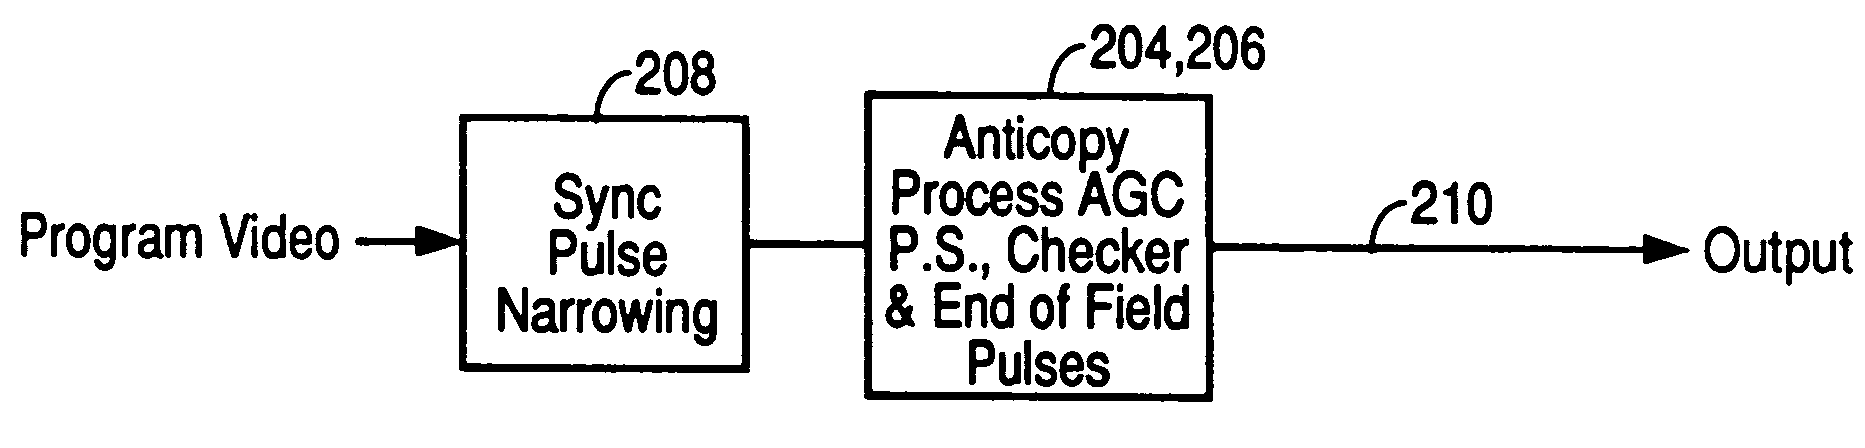 Copy protection for video signal using narrowed horizontal synchronization signals and amplitude modulation